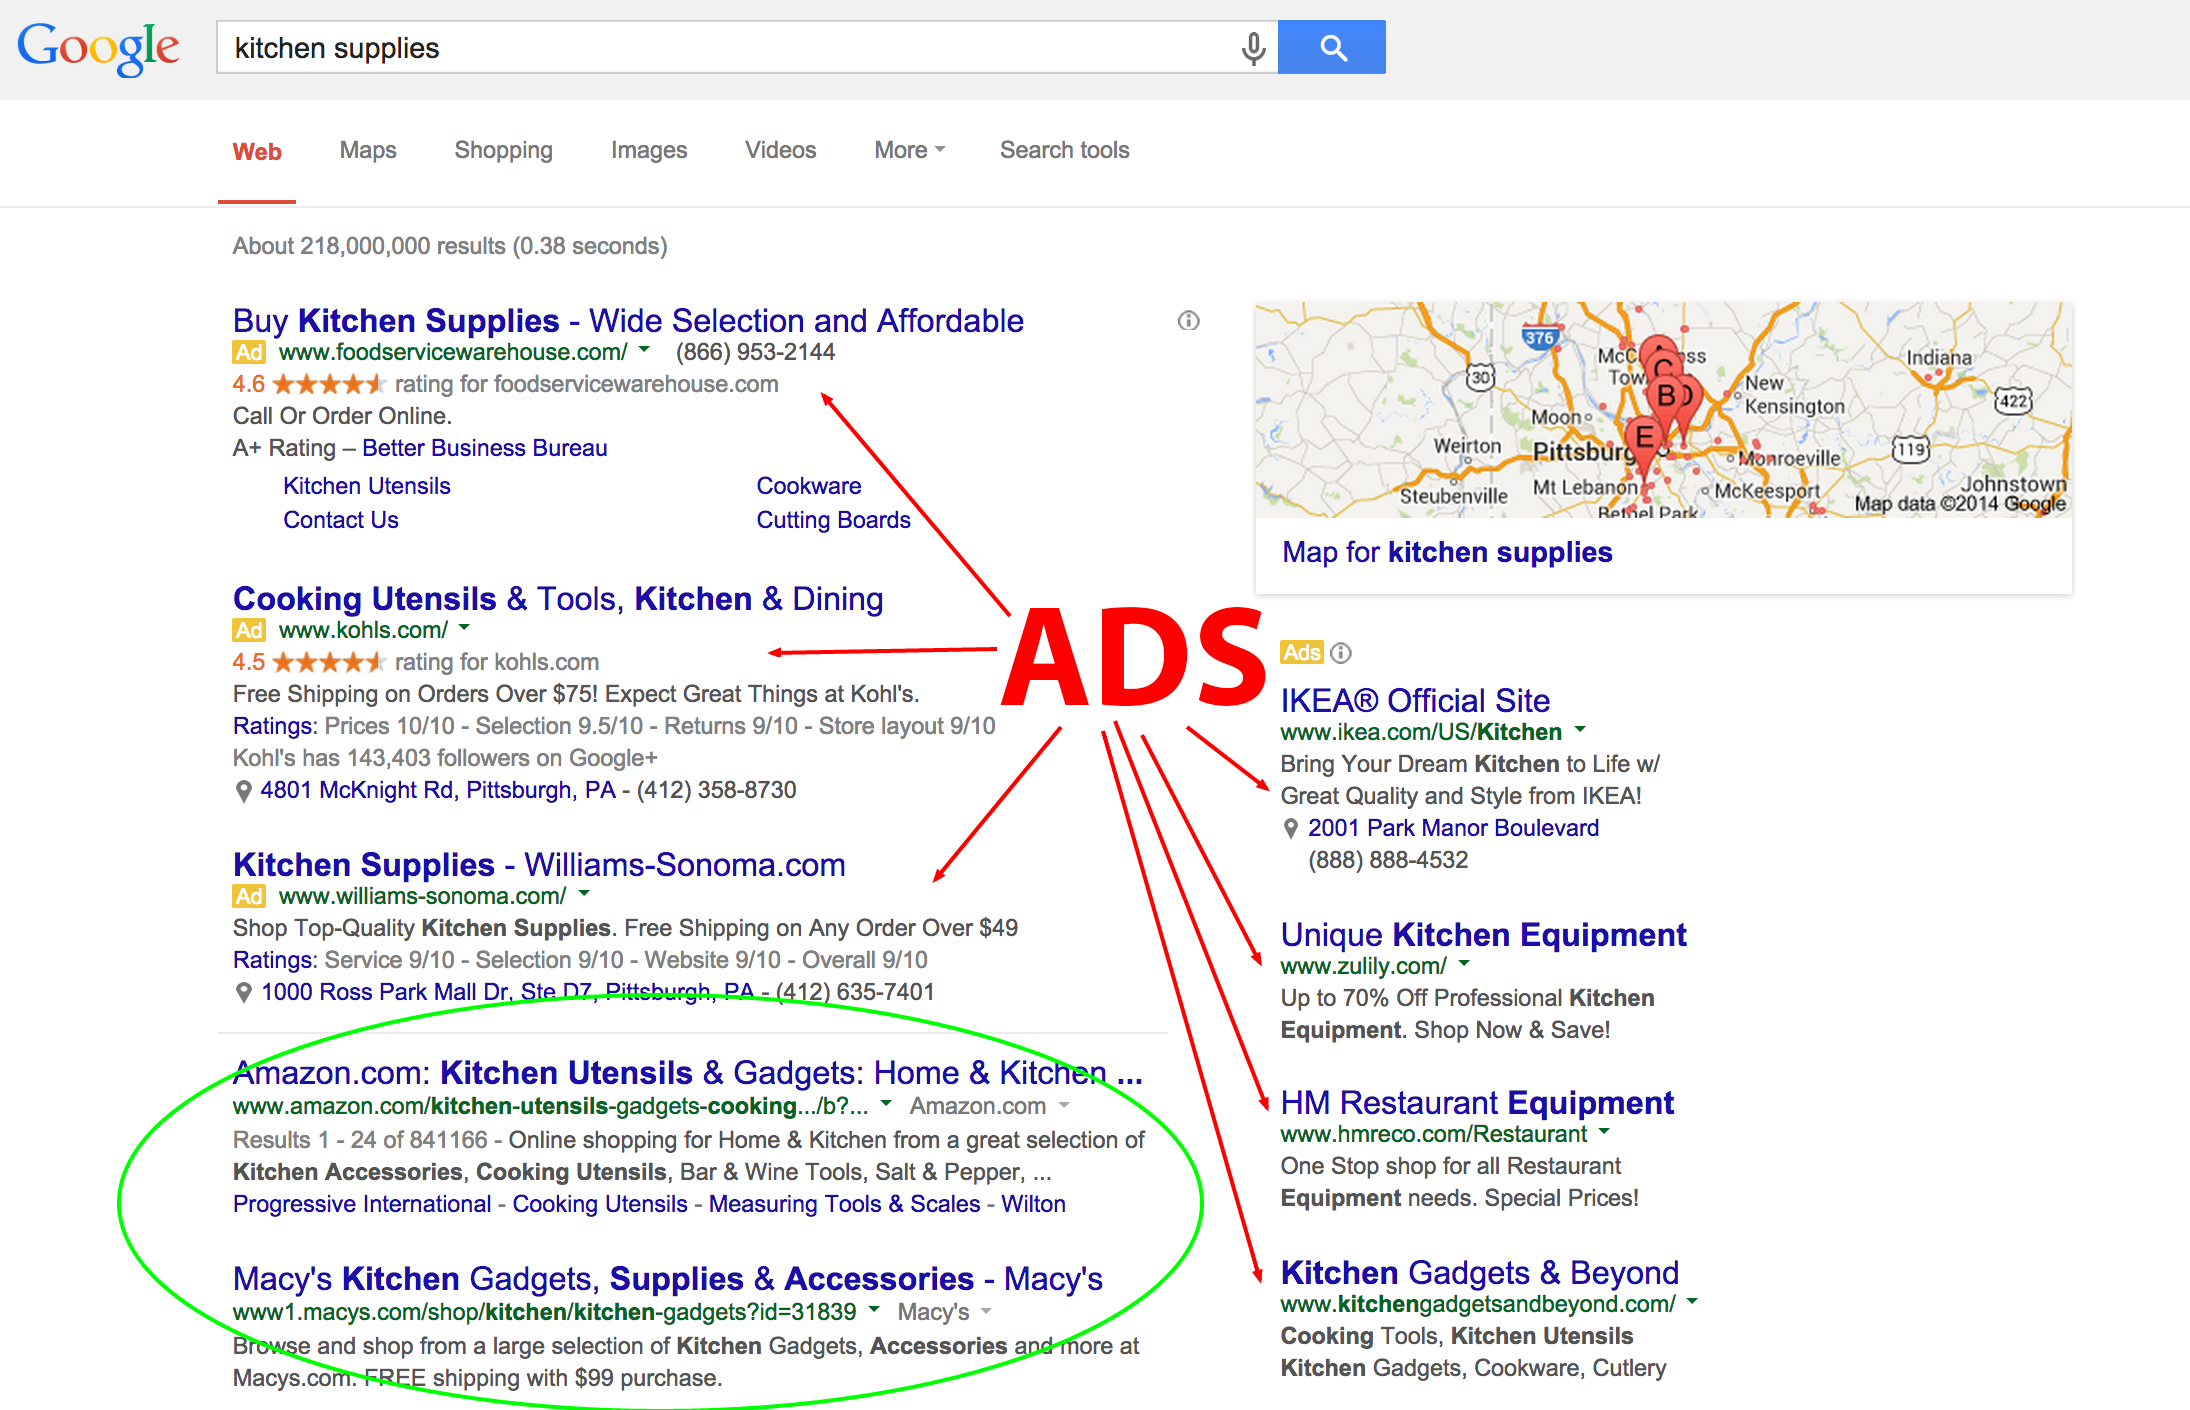 Showing how non-social searches pull up a great deal of ads